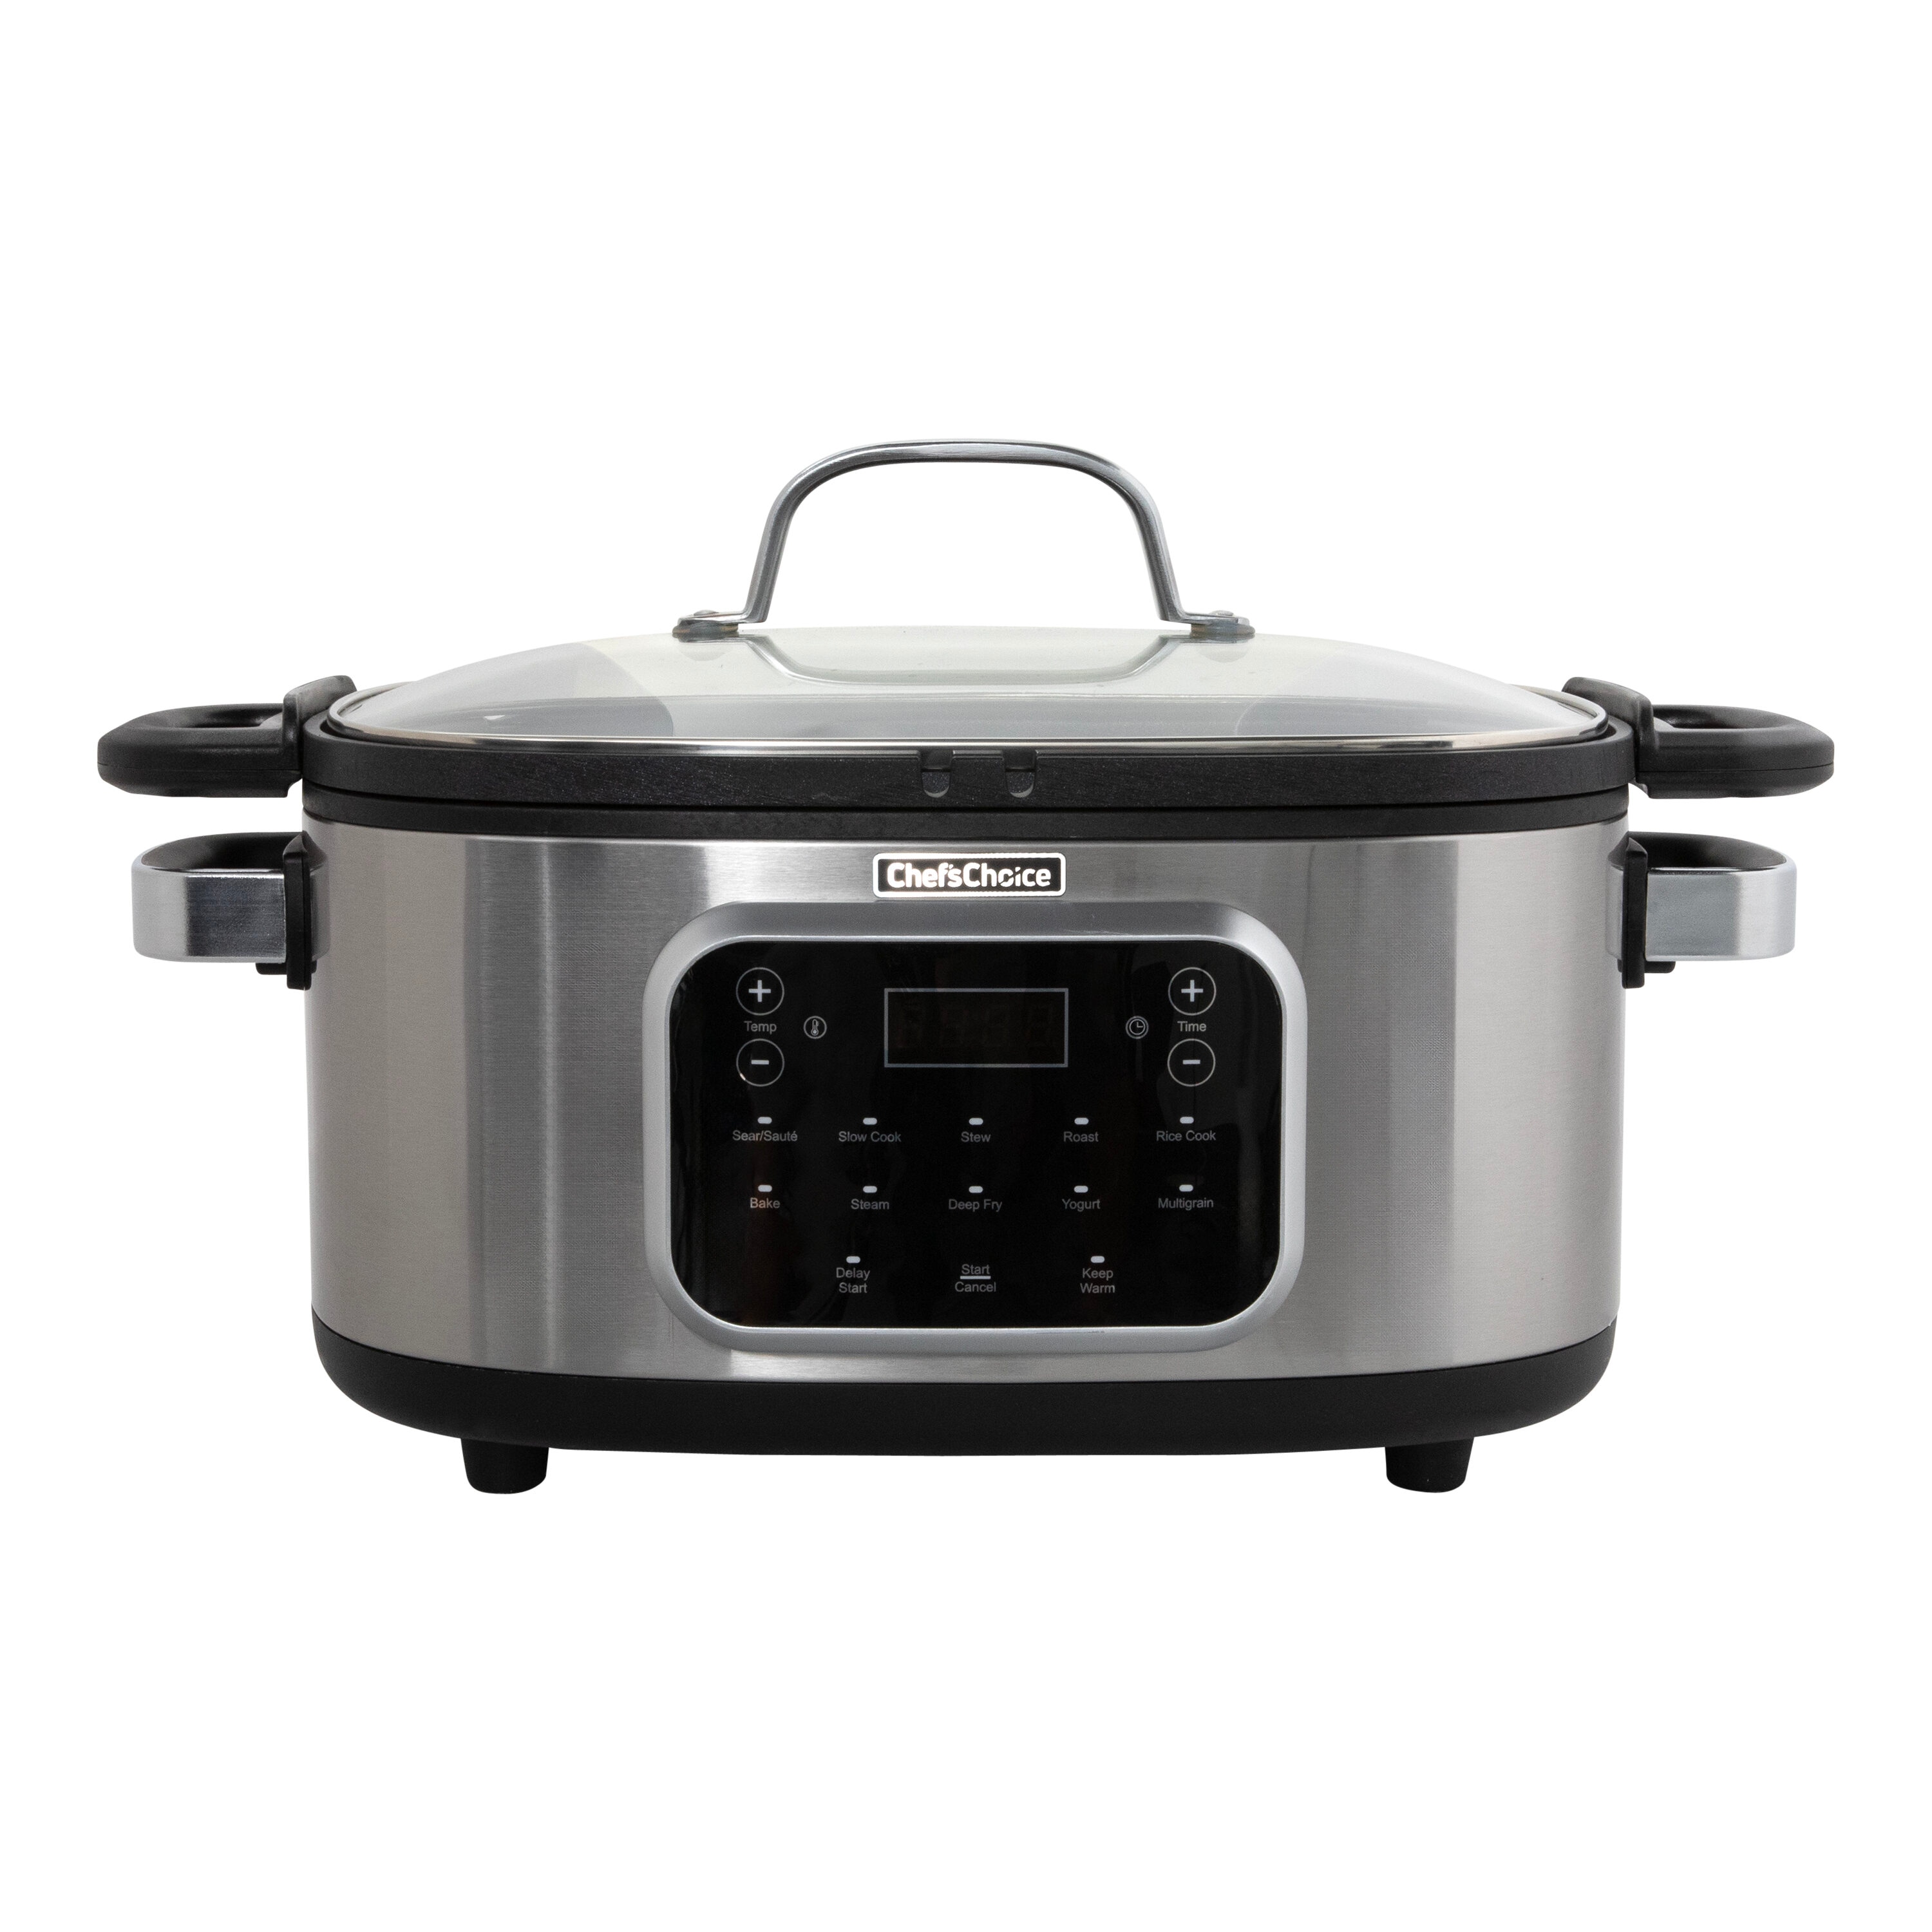  West Bend Slow Cooker Large Capacity Non-stick Variable  Temperature Control, 5-Quart, Blue & Slow Cooker Large Capacity Non-stick  Variable Temperature Control, 6-Quart, Red : Clothing, Shoes & Jewelry